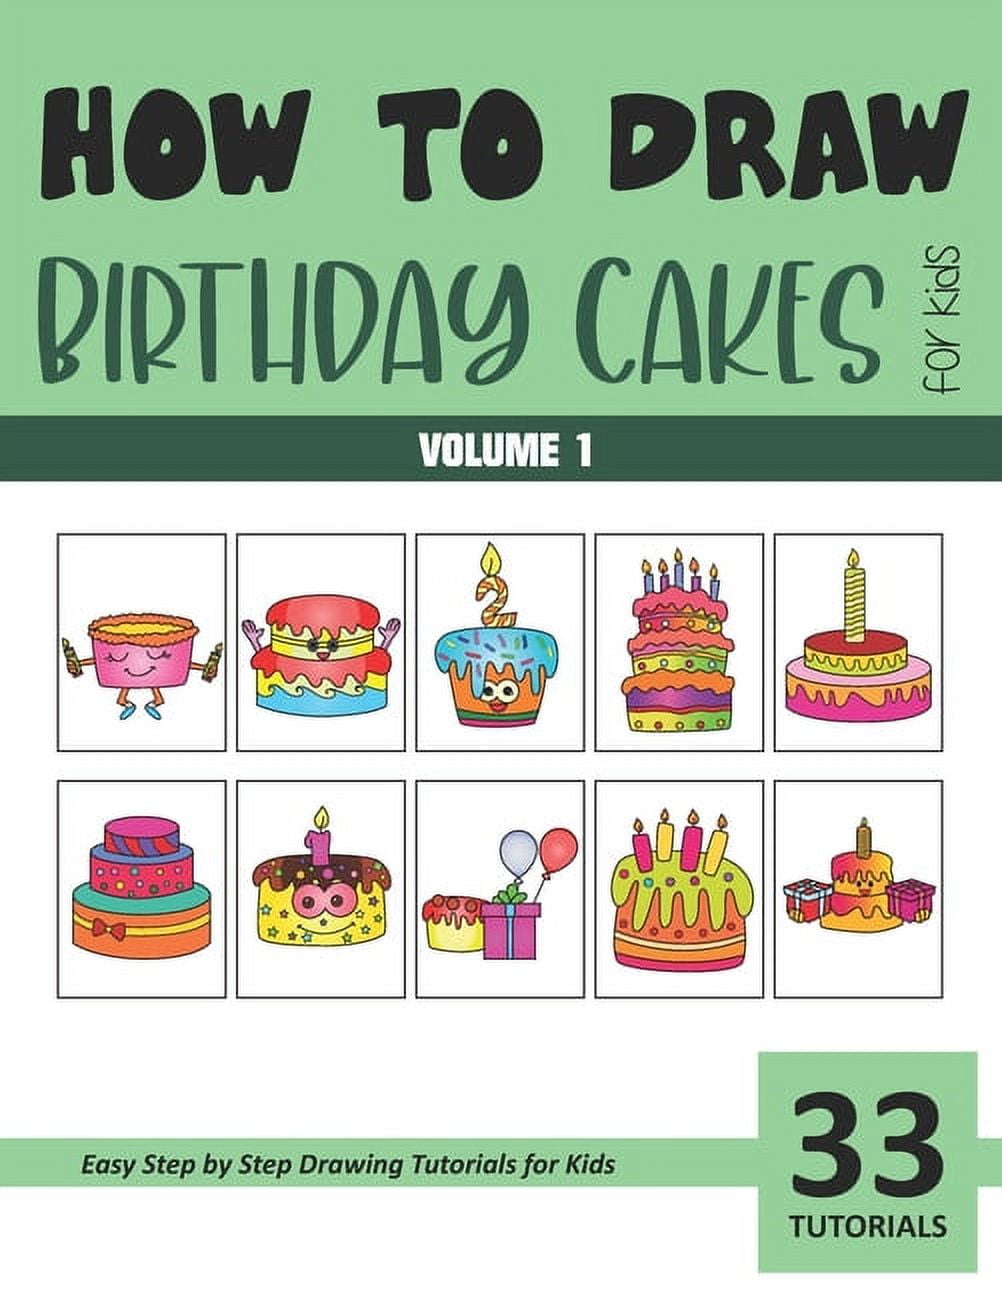 How To Draw A Birthday Cake, Step by Step, Drawing Guide, by Dawn - DragoArt-saigonsouth.com.vn